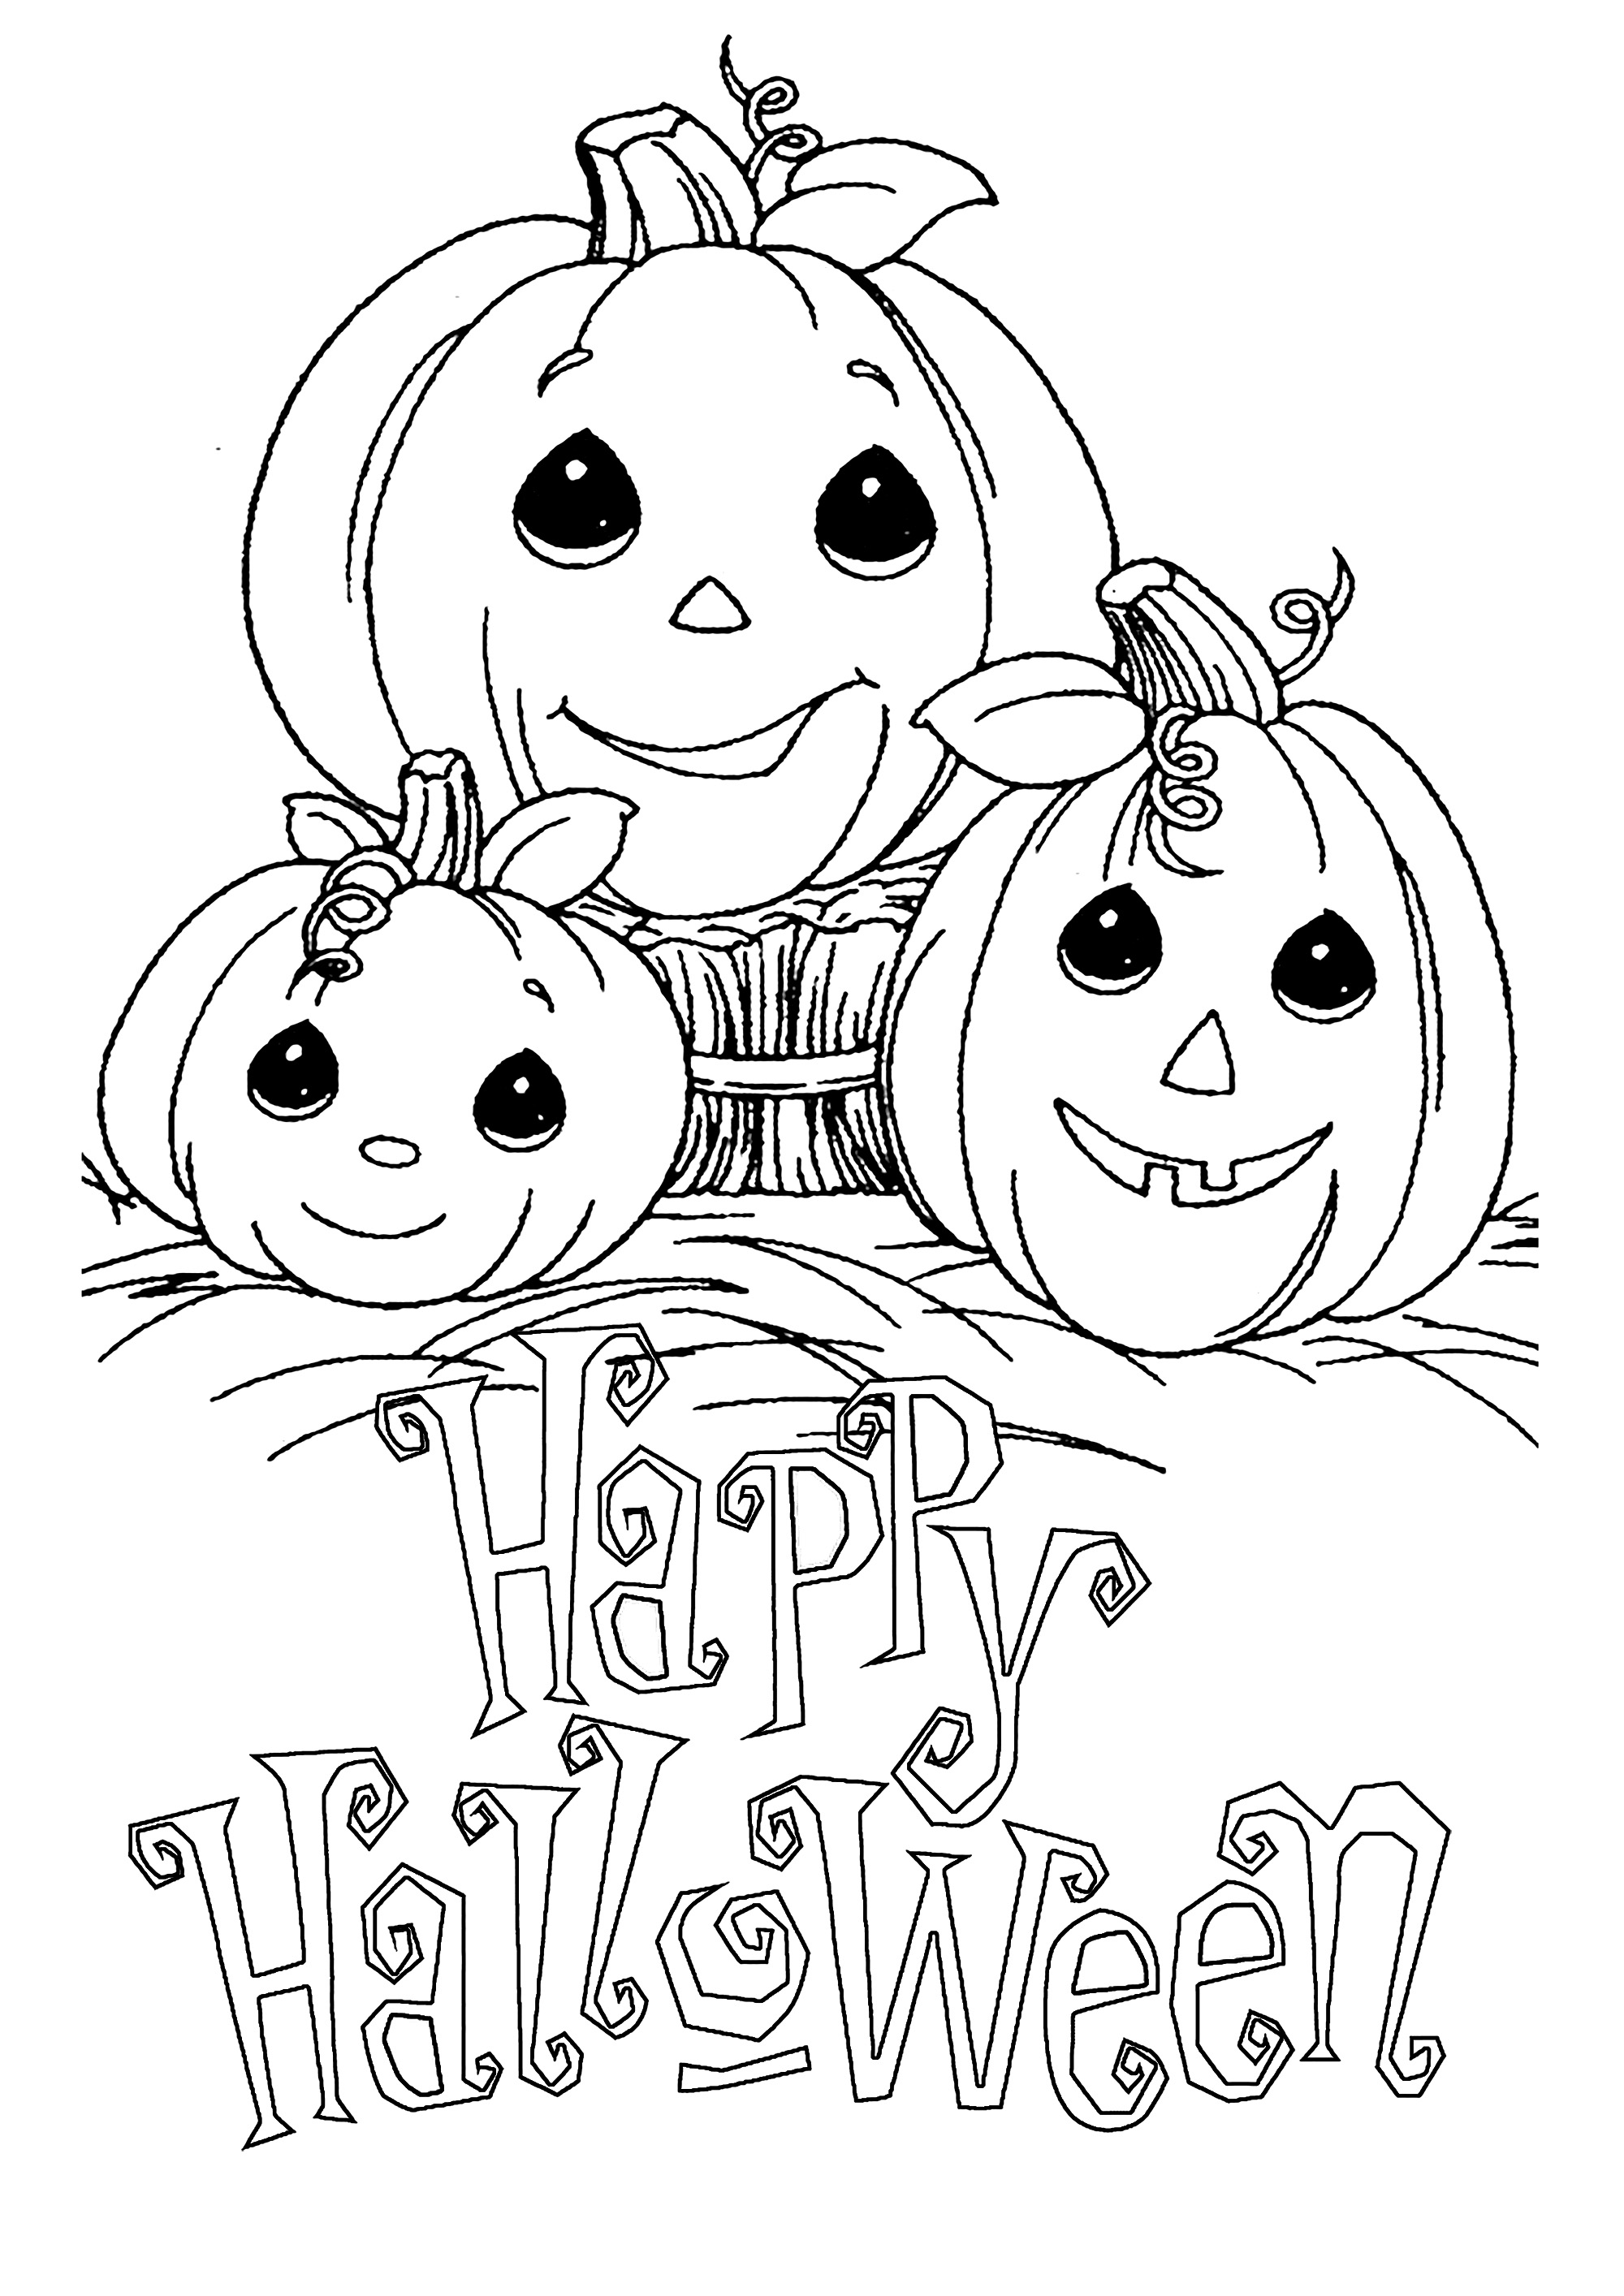 Three pretty Halloween pumpkins. Color these three pumpkins and the text 'Happy Halloween'.